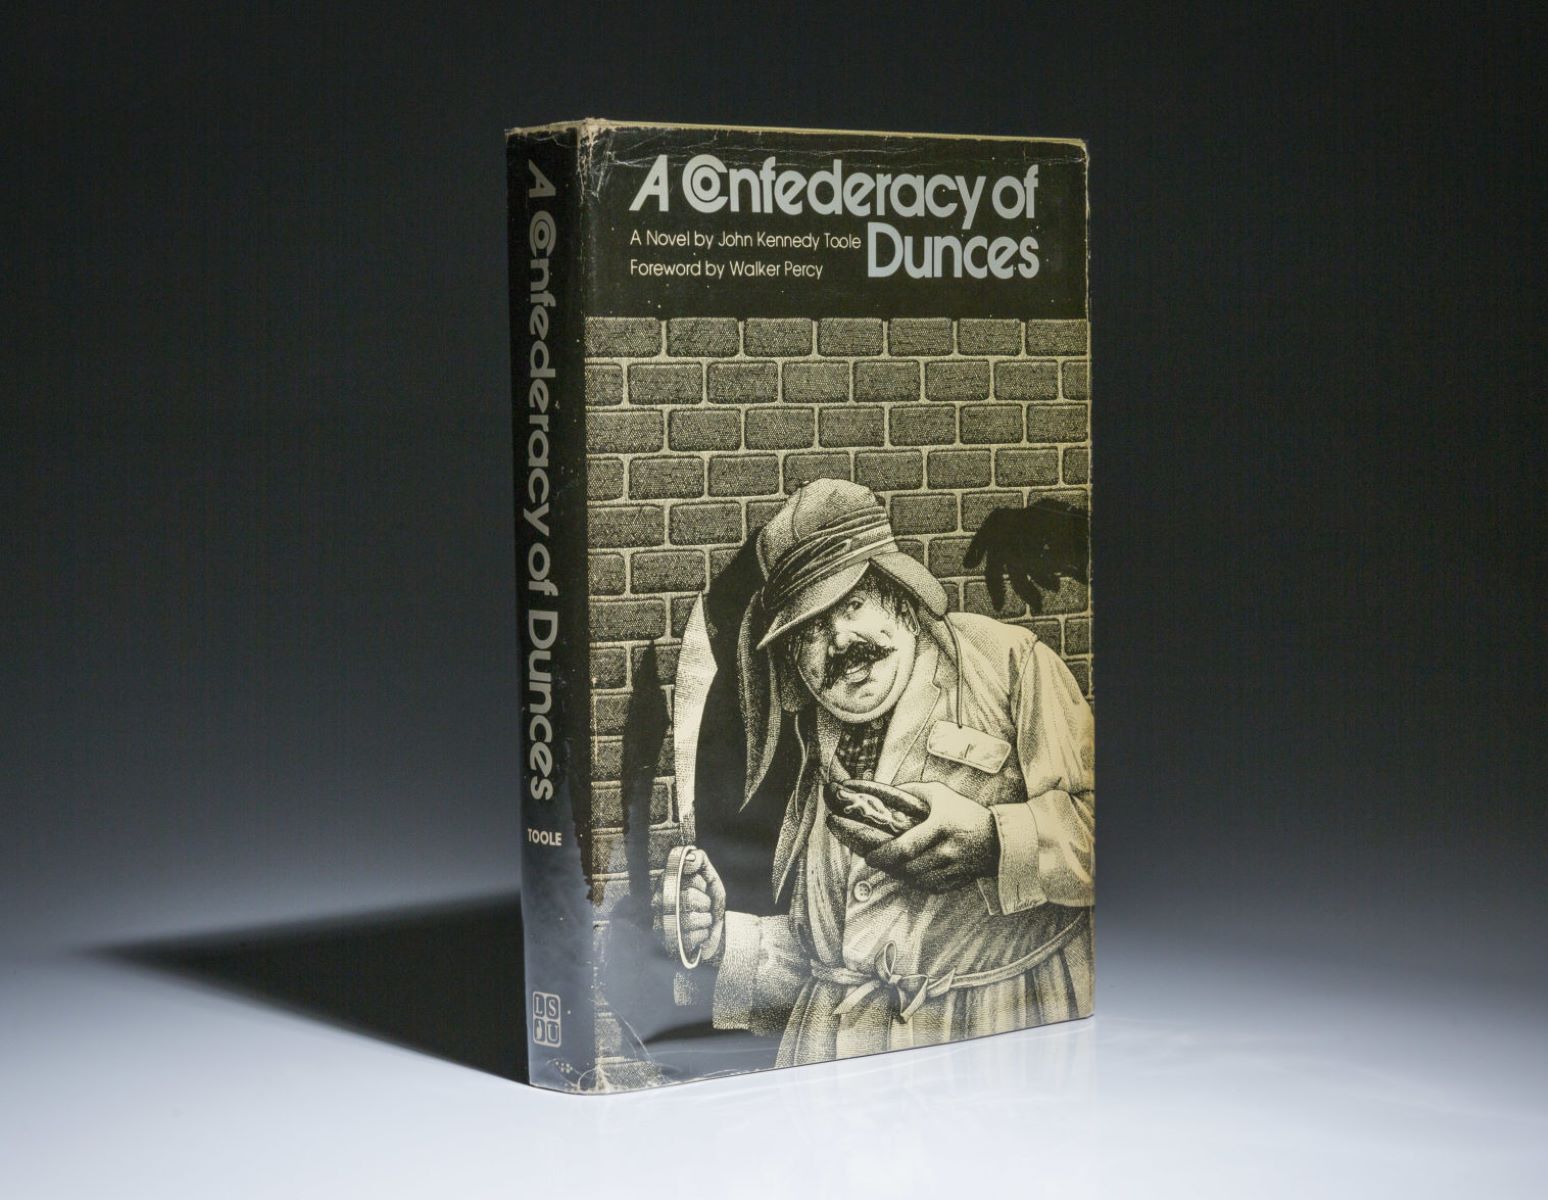 20-astounding-facts-about-a-confederacy-of-dunces-john-kennedy-toole